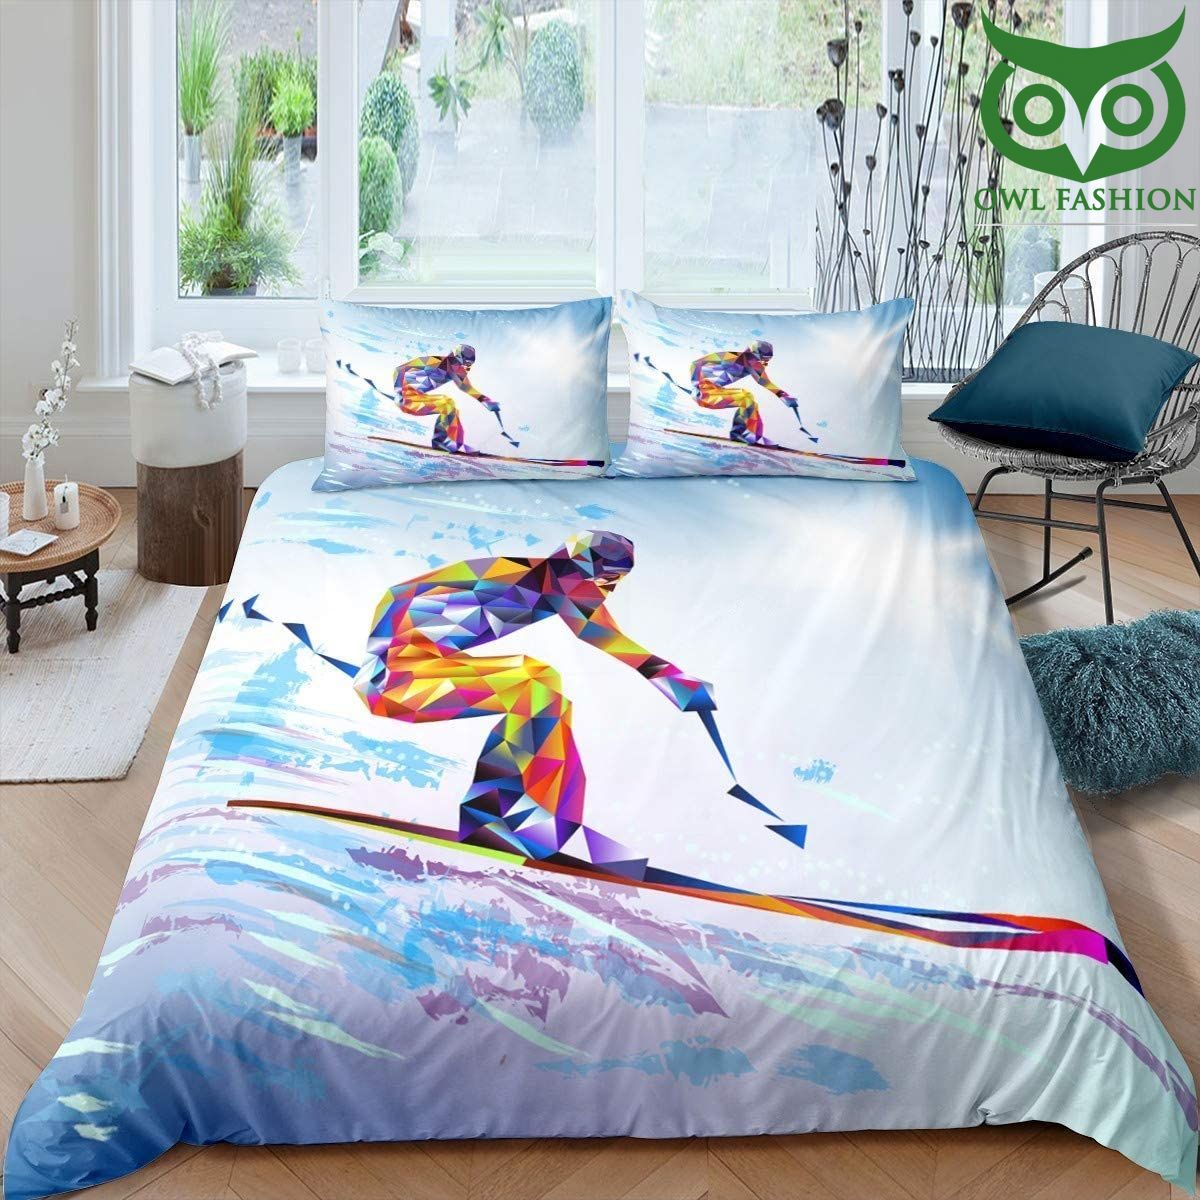 Skiing bedding set Skier water color